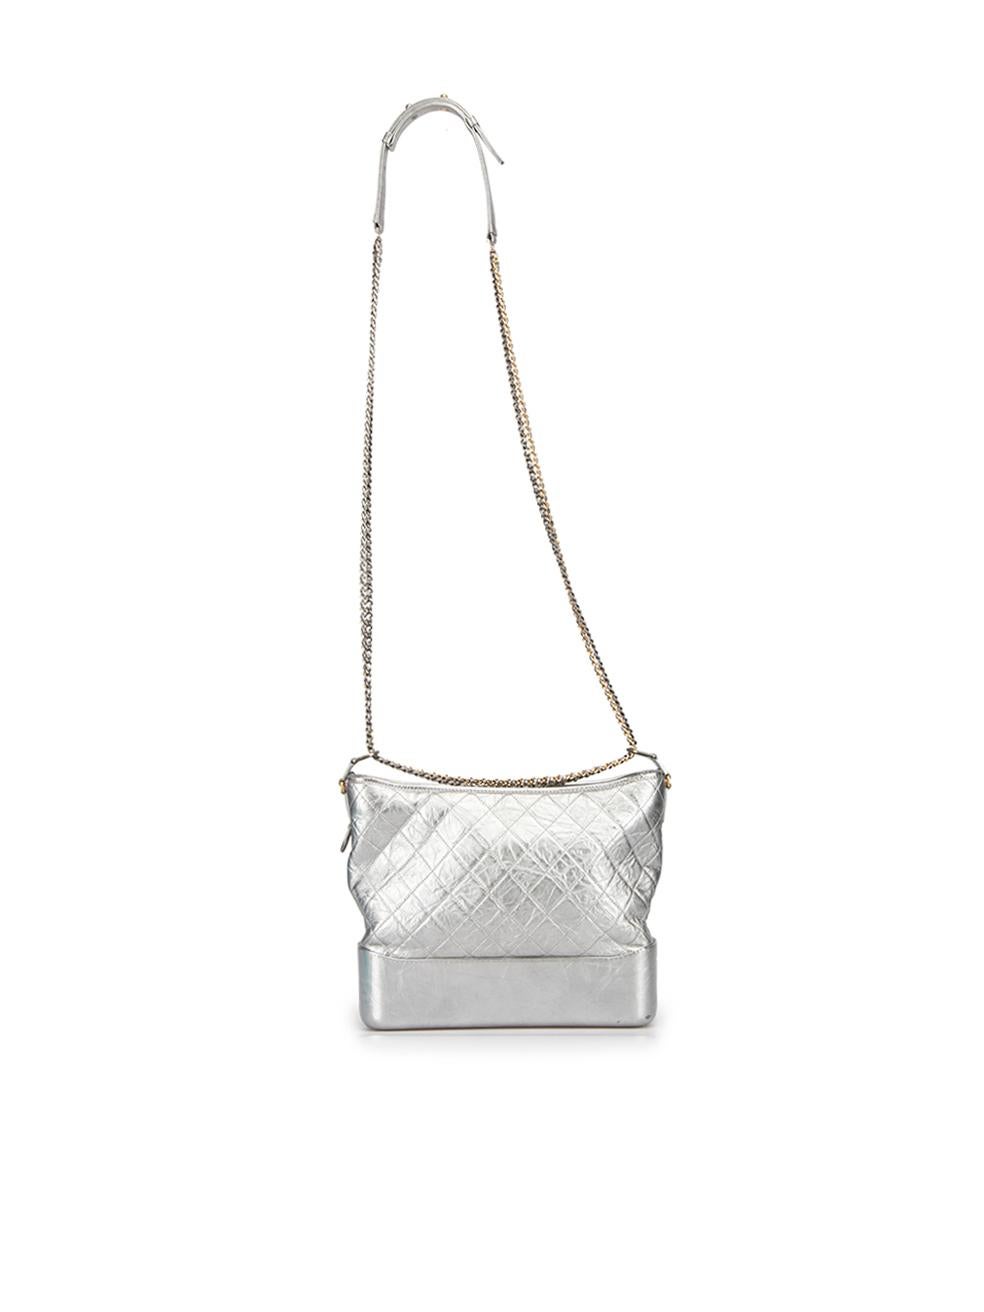 Women's Chanel Silver Leather Gabrielle Hobo Bag For Sale